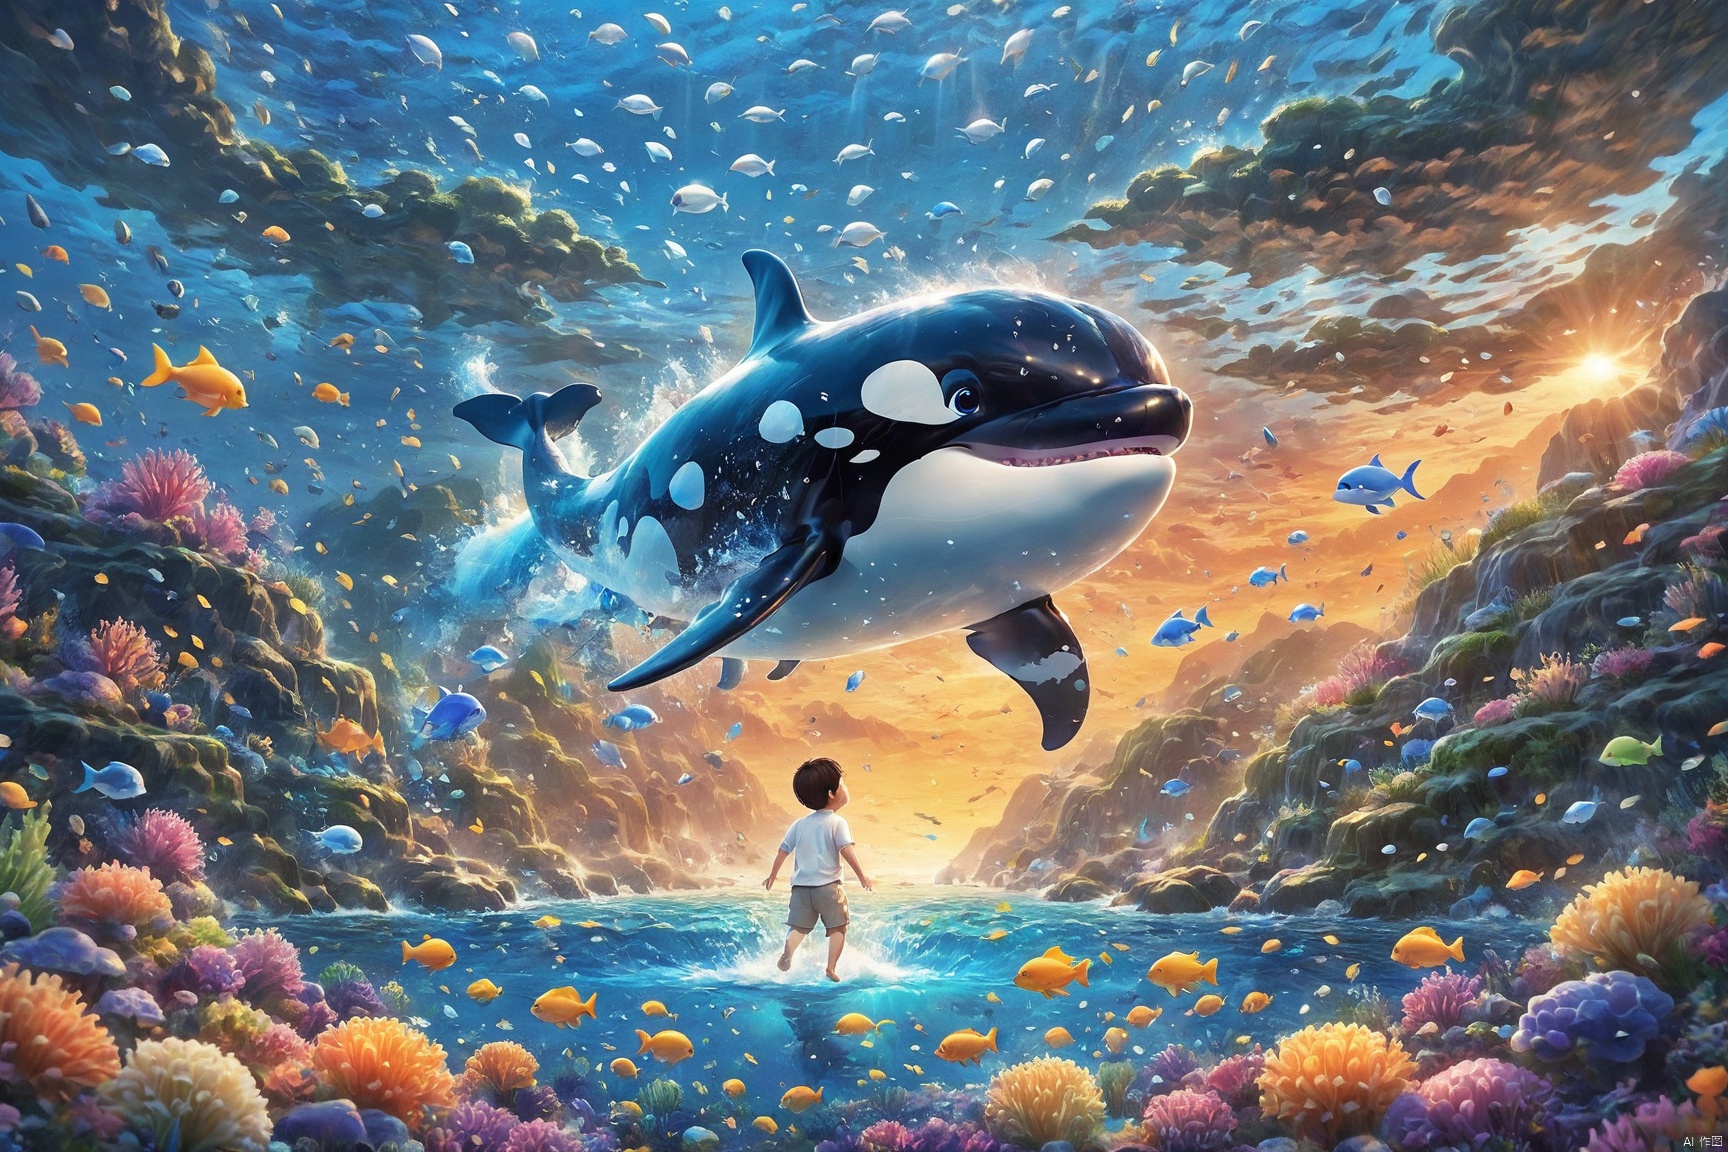 A boy with shining eyes, swimming through a colorful underwater world. Surrounded by various adorable sea creatures, a killer whale after him,A masterpiece with bright lights and cartoon-like visual effects., duobaansheying